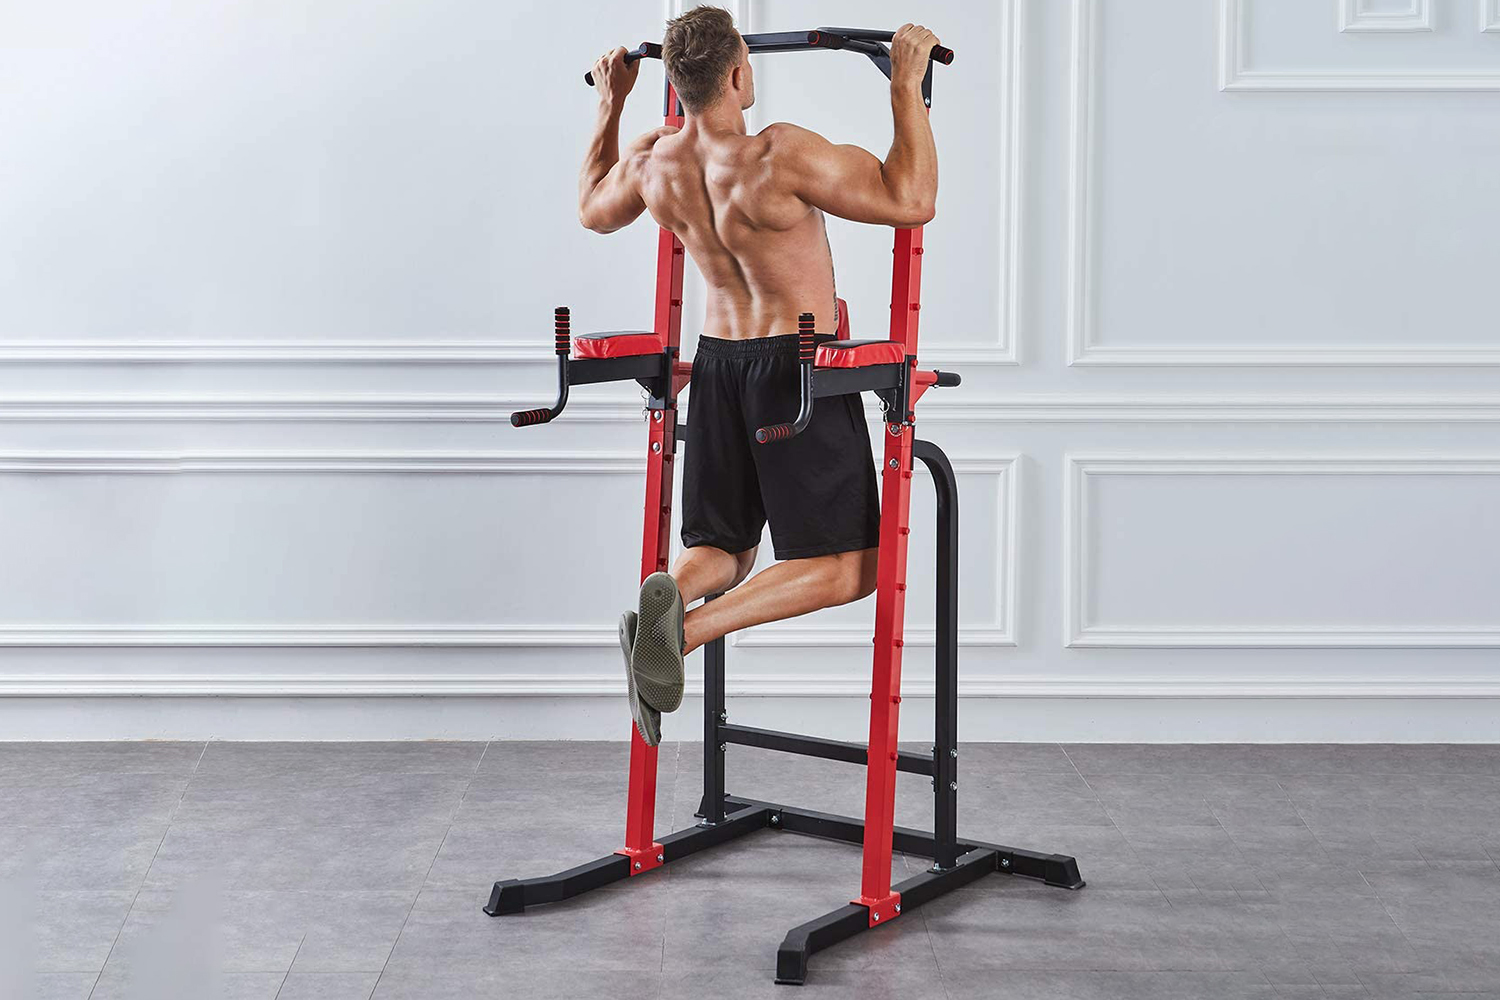 Pull Up Bars For Home Workout -Chin Up Bar Gym Accessories for Men Door Way  Adju